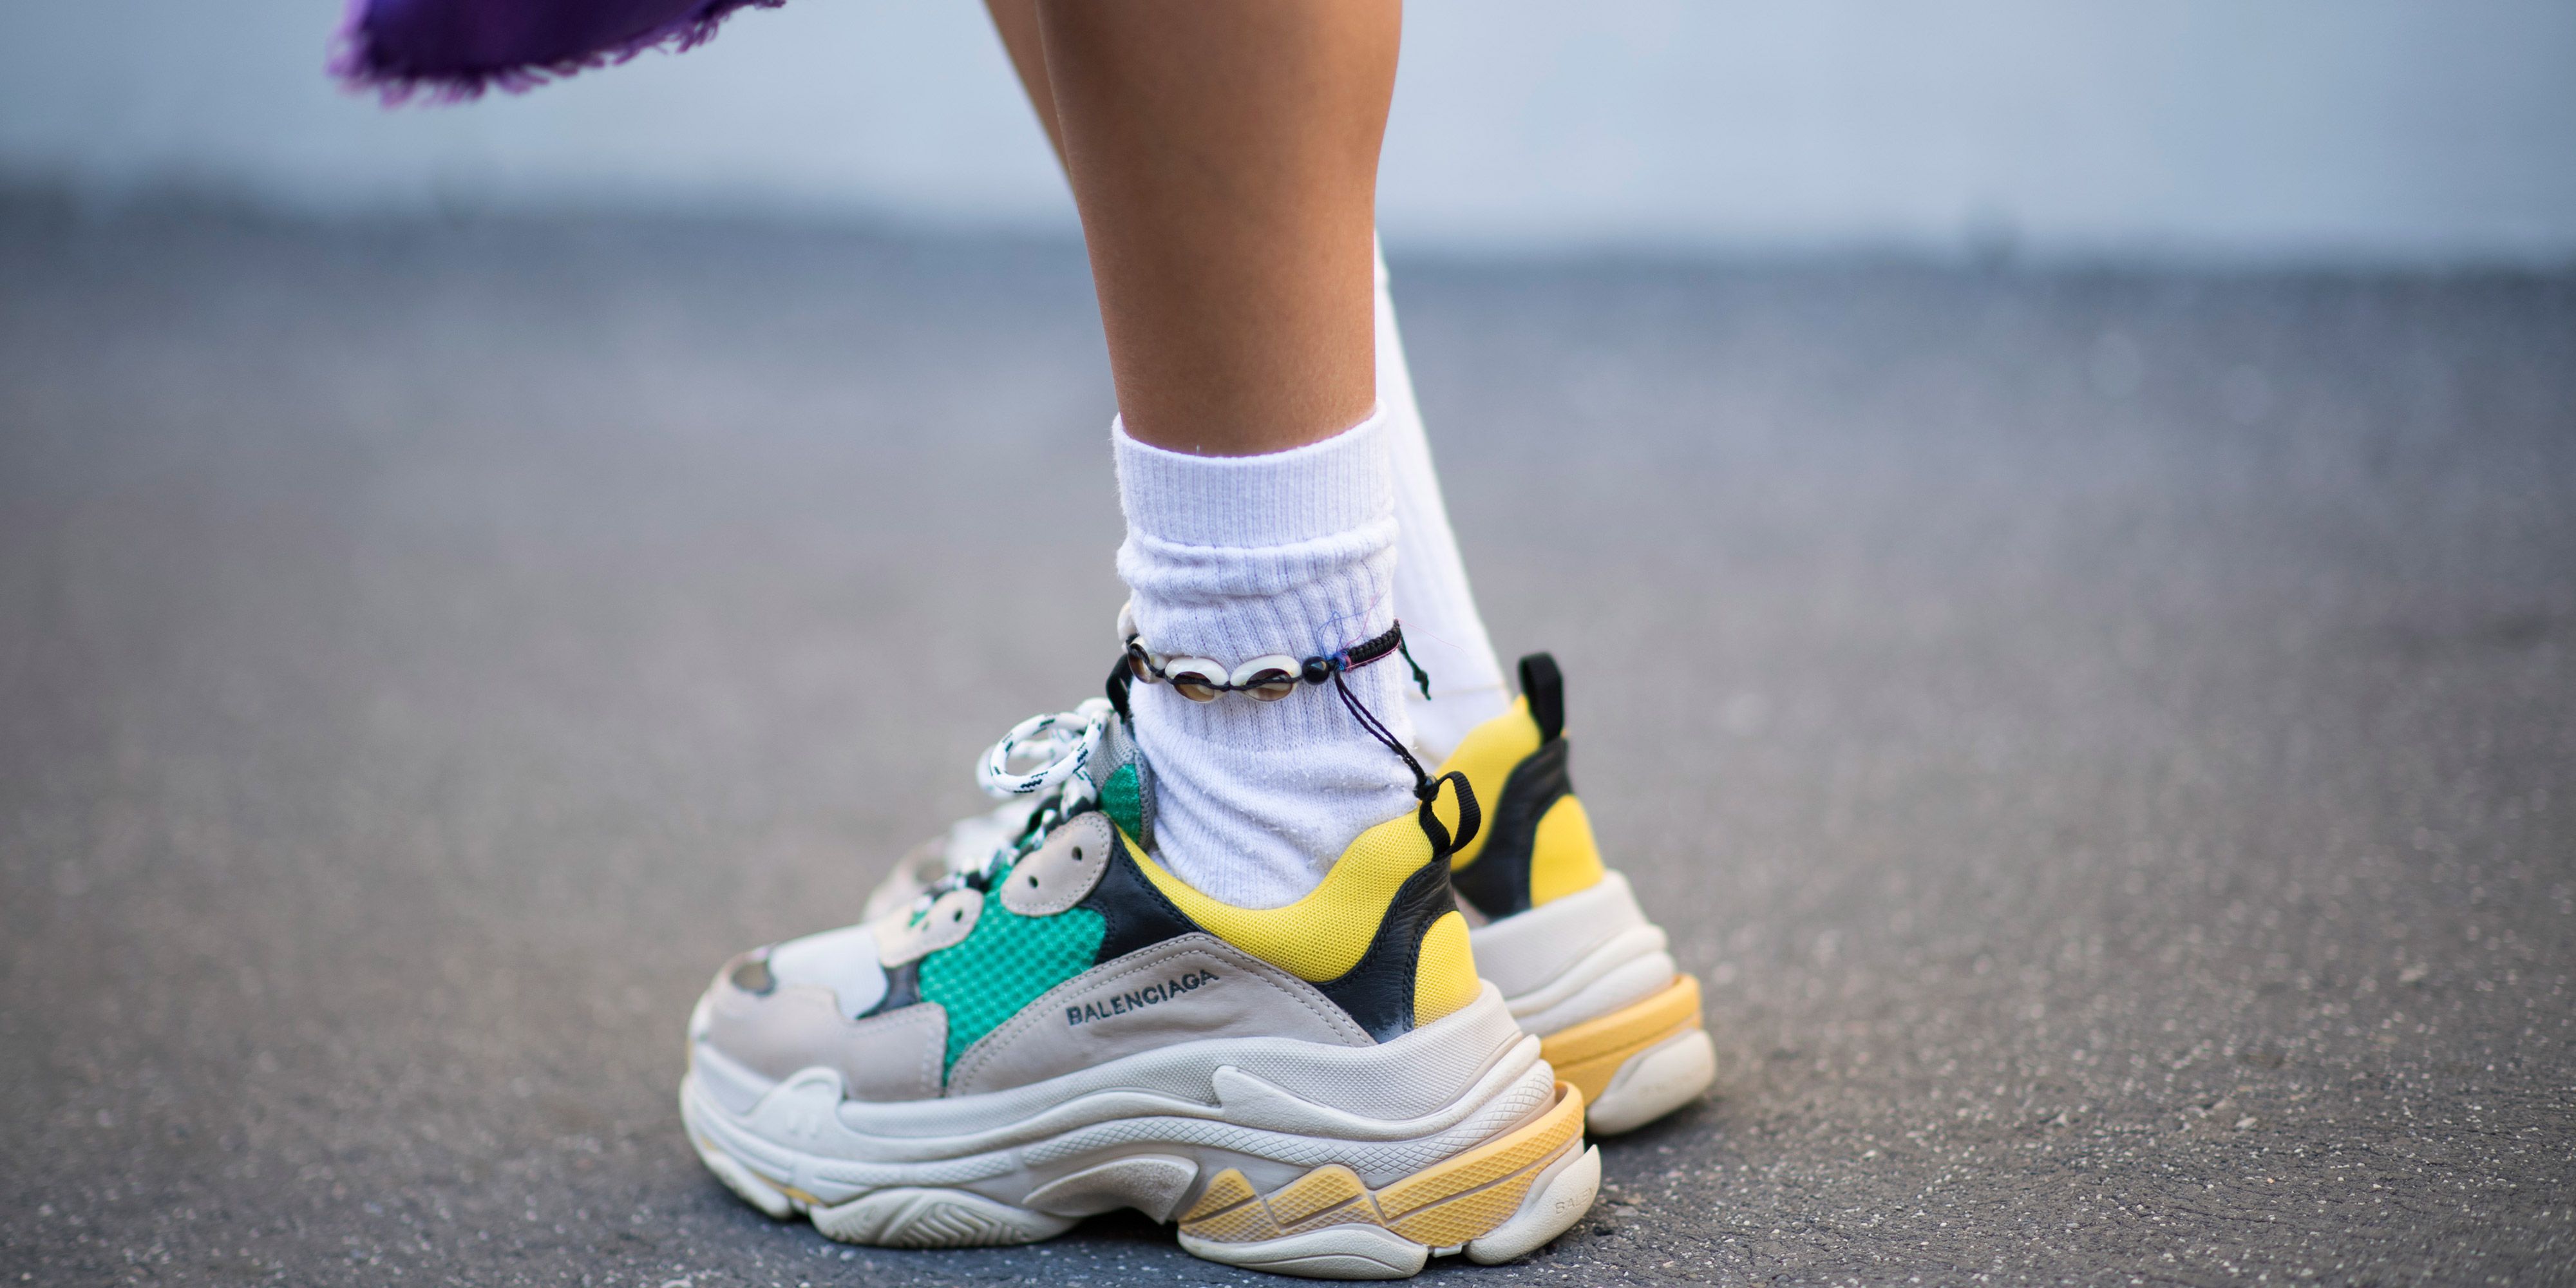 Dad' trainers are everywhere, but would you wear them?